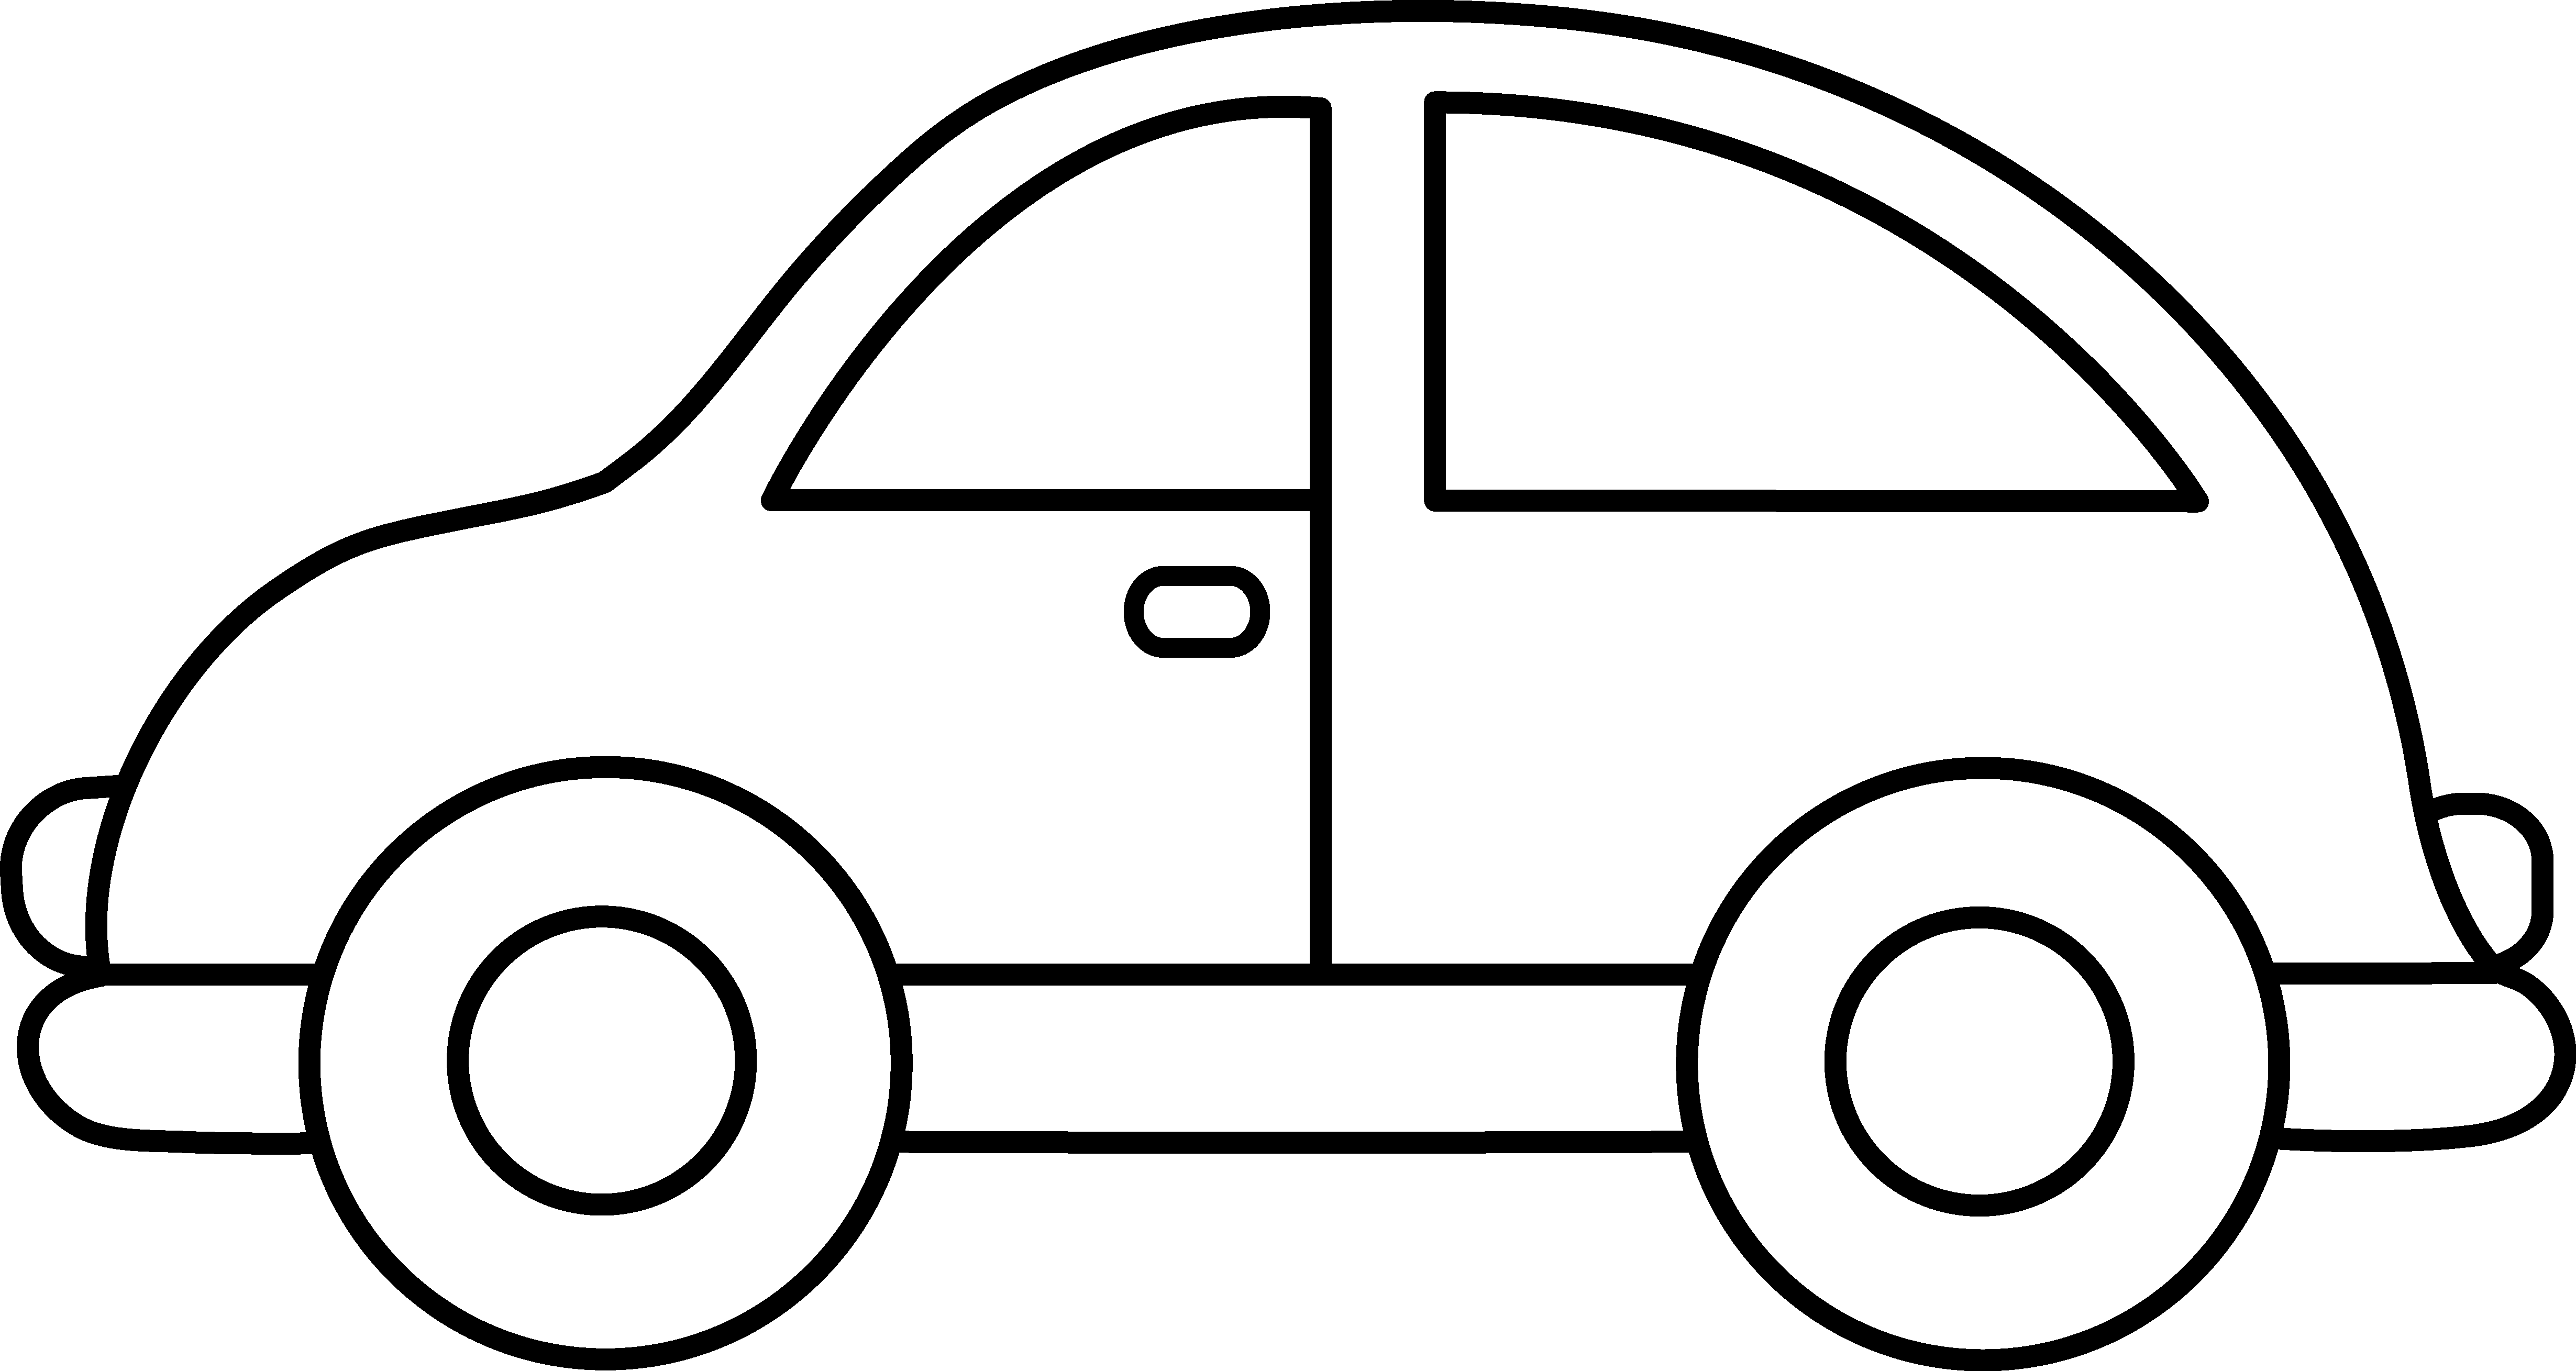 Car silhouette at getdrawings. Clipart children scooter